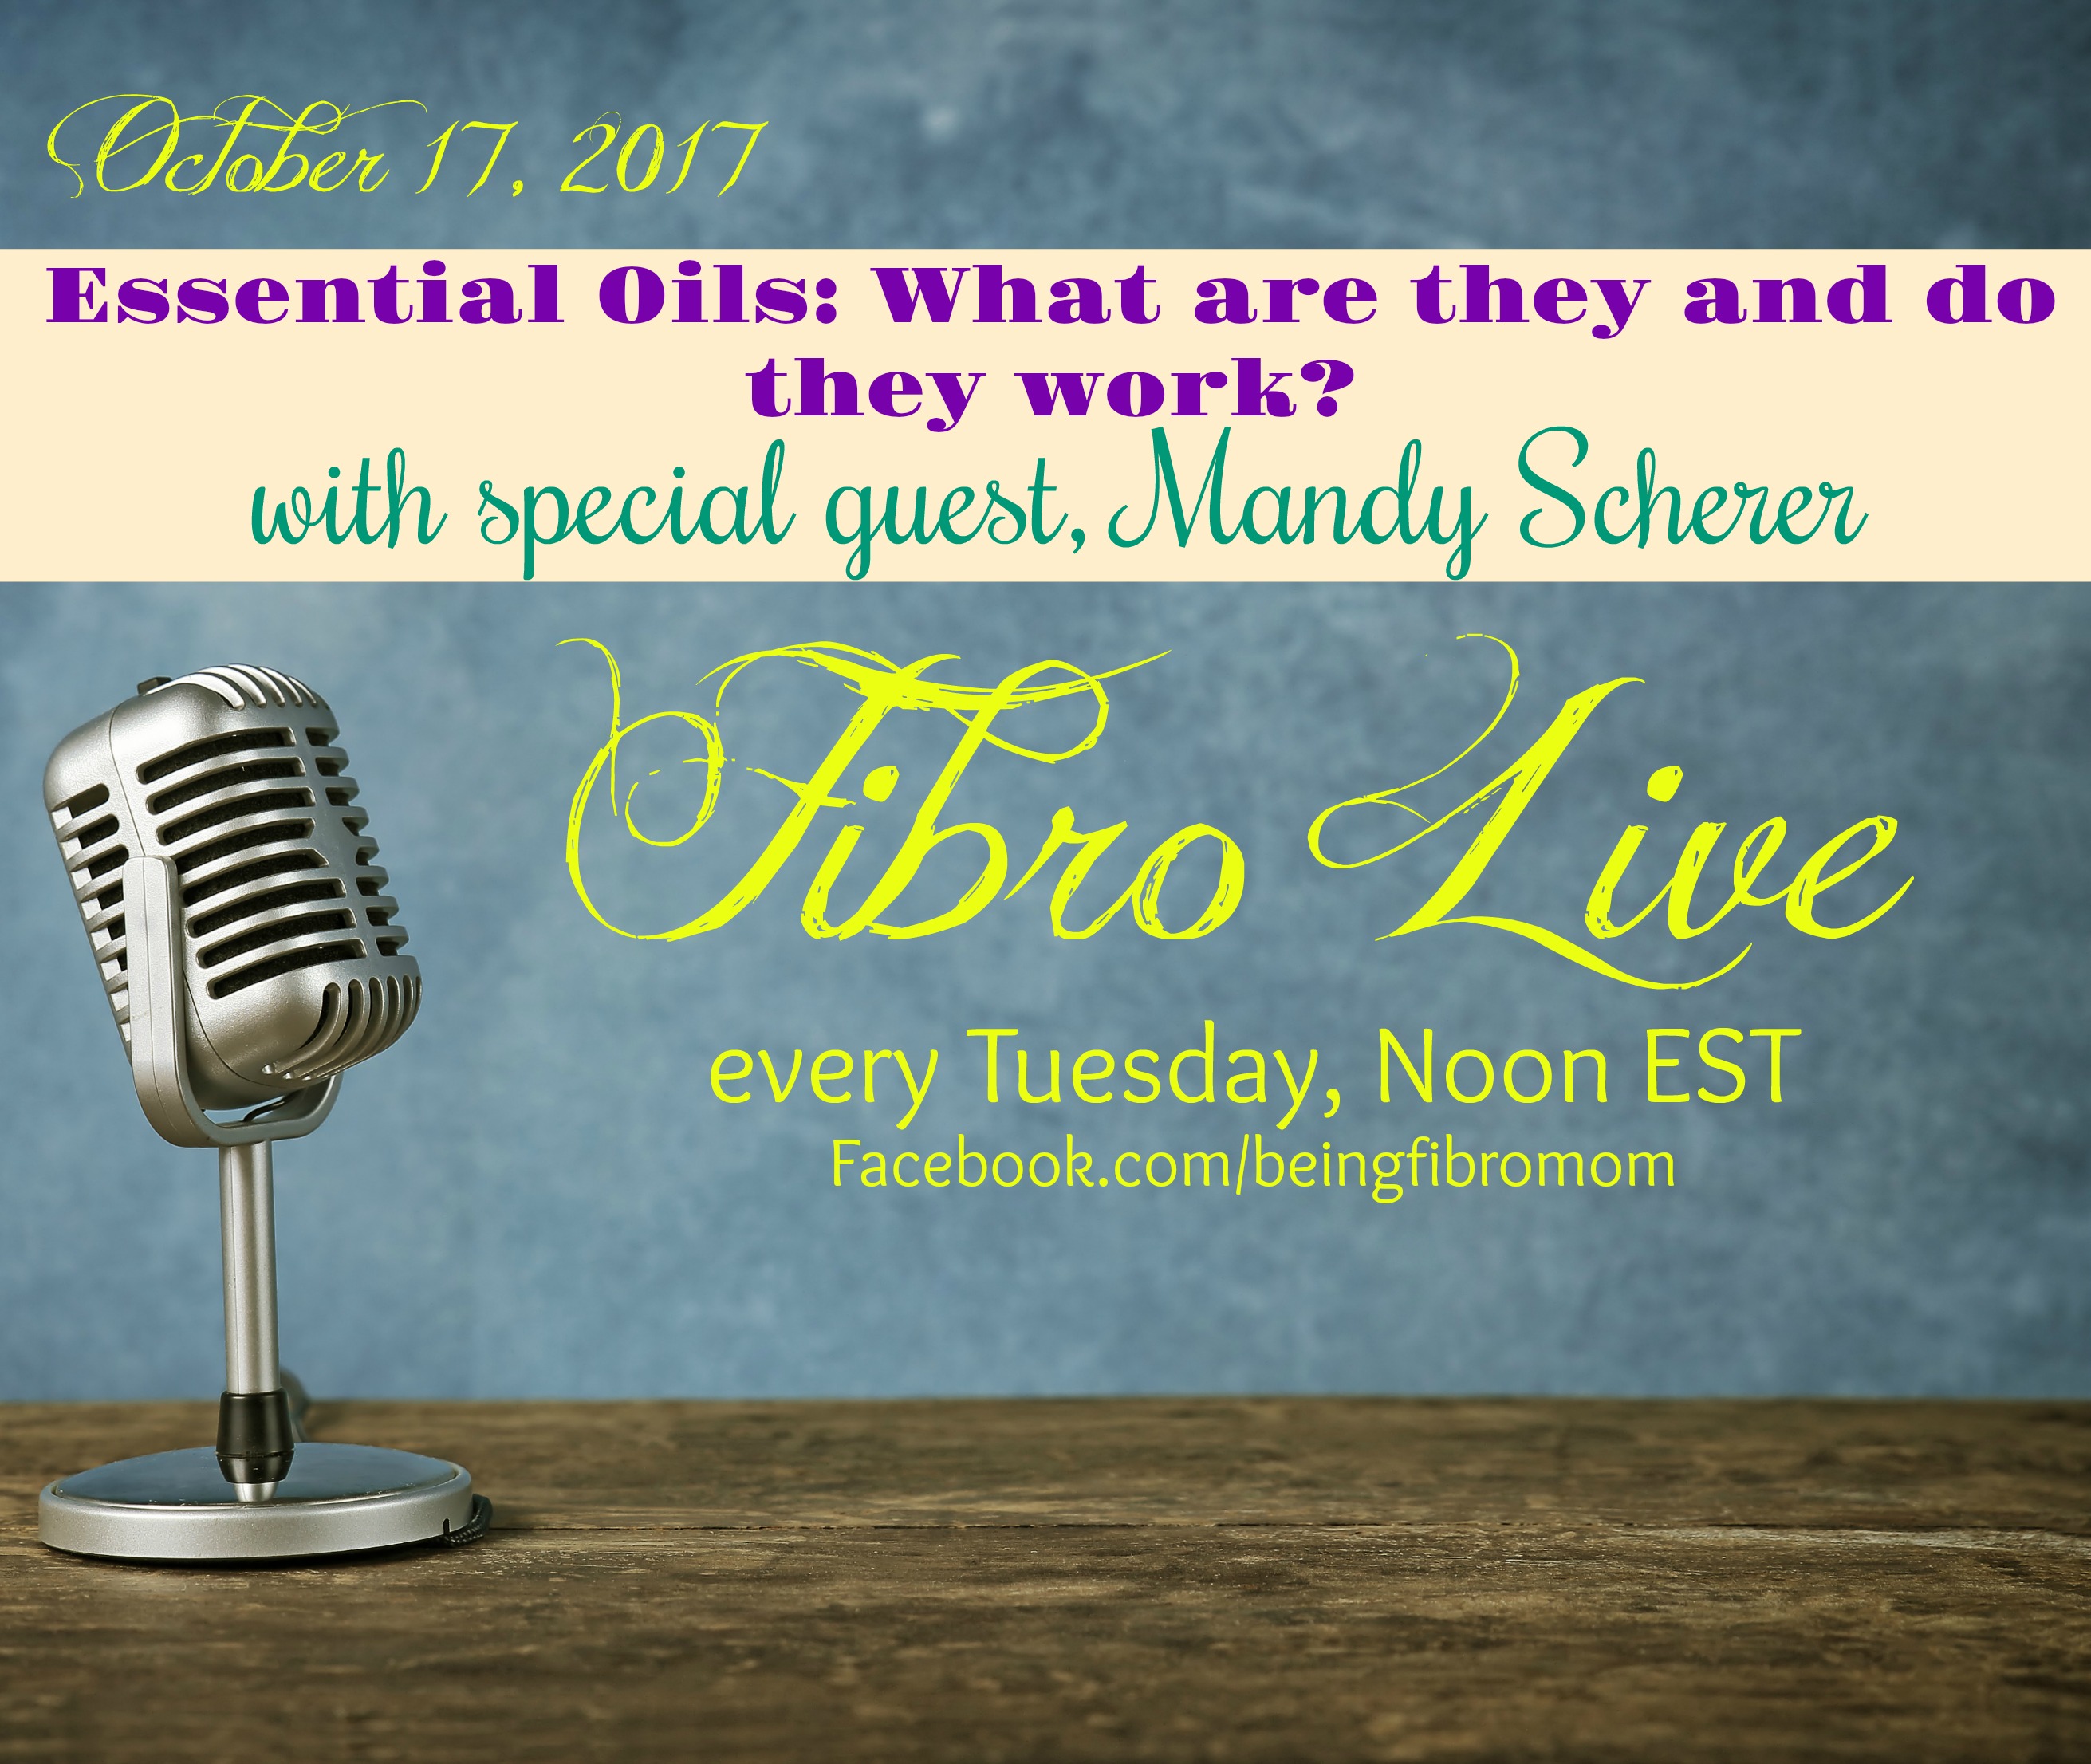 Essential Oils: Do they really work? #FibroLive #beingfibromom